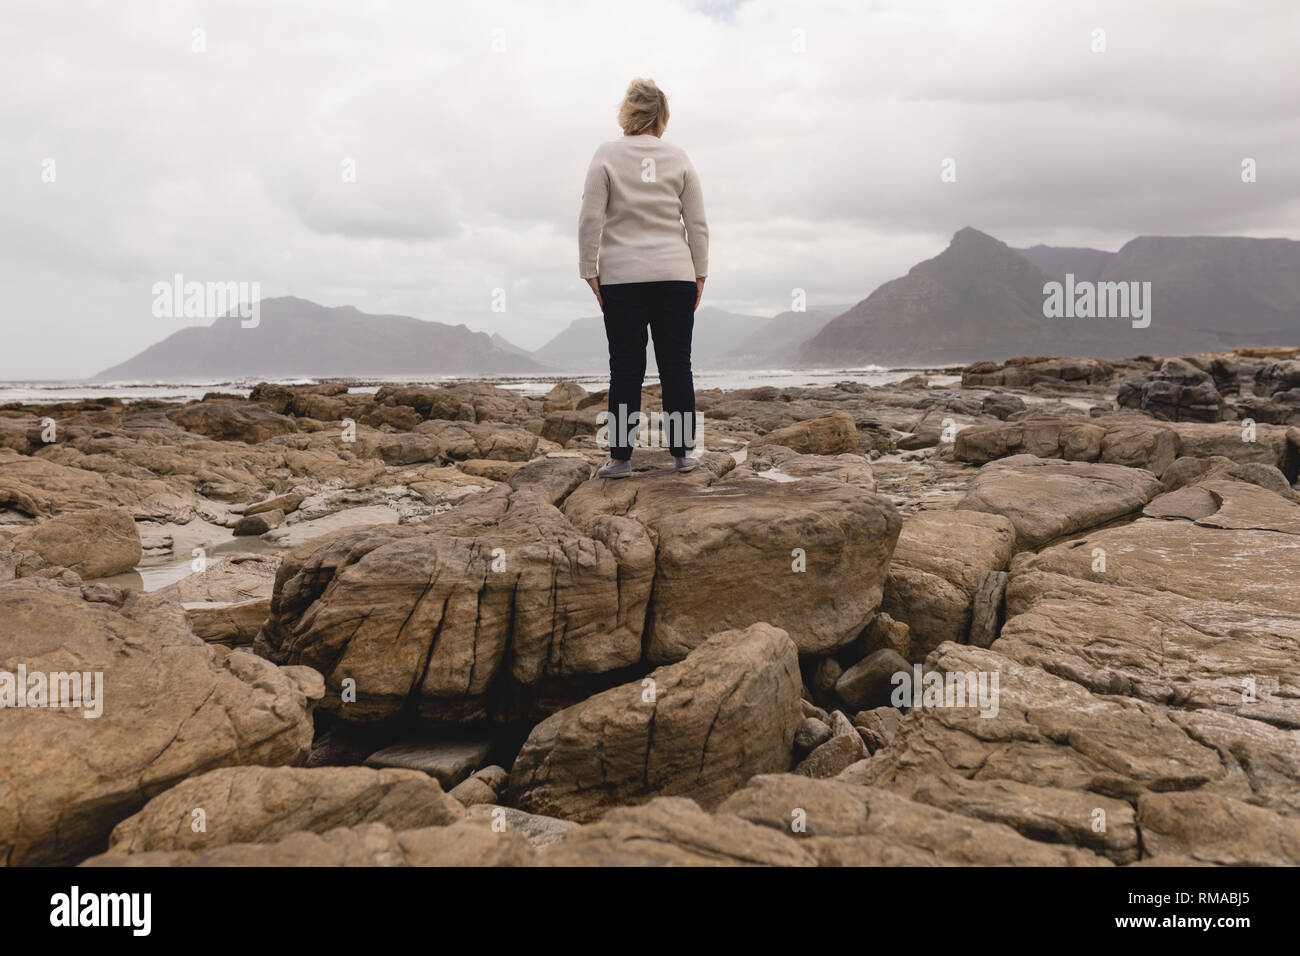 Happy senior woman standing on the rock at beach Stock Photo